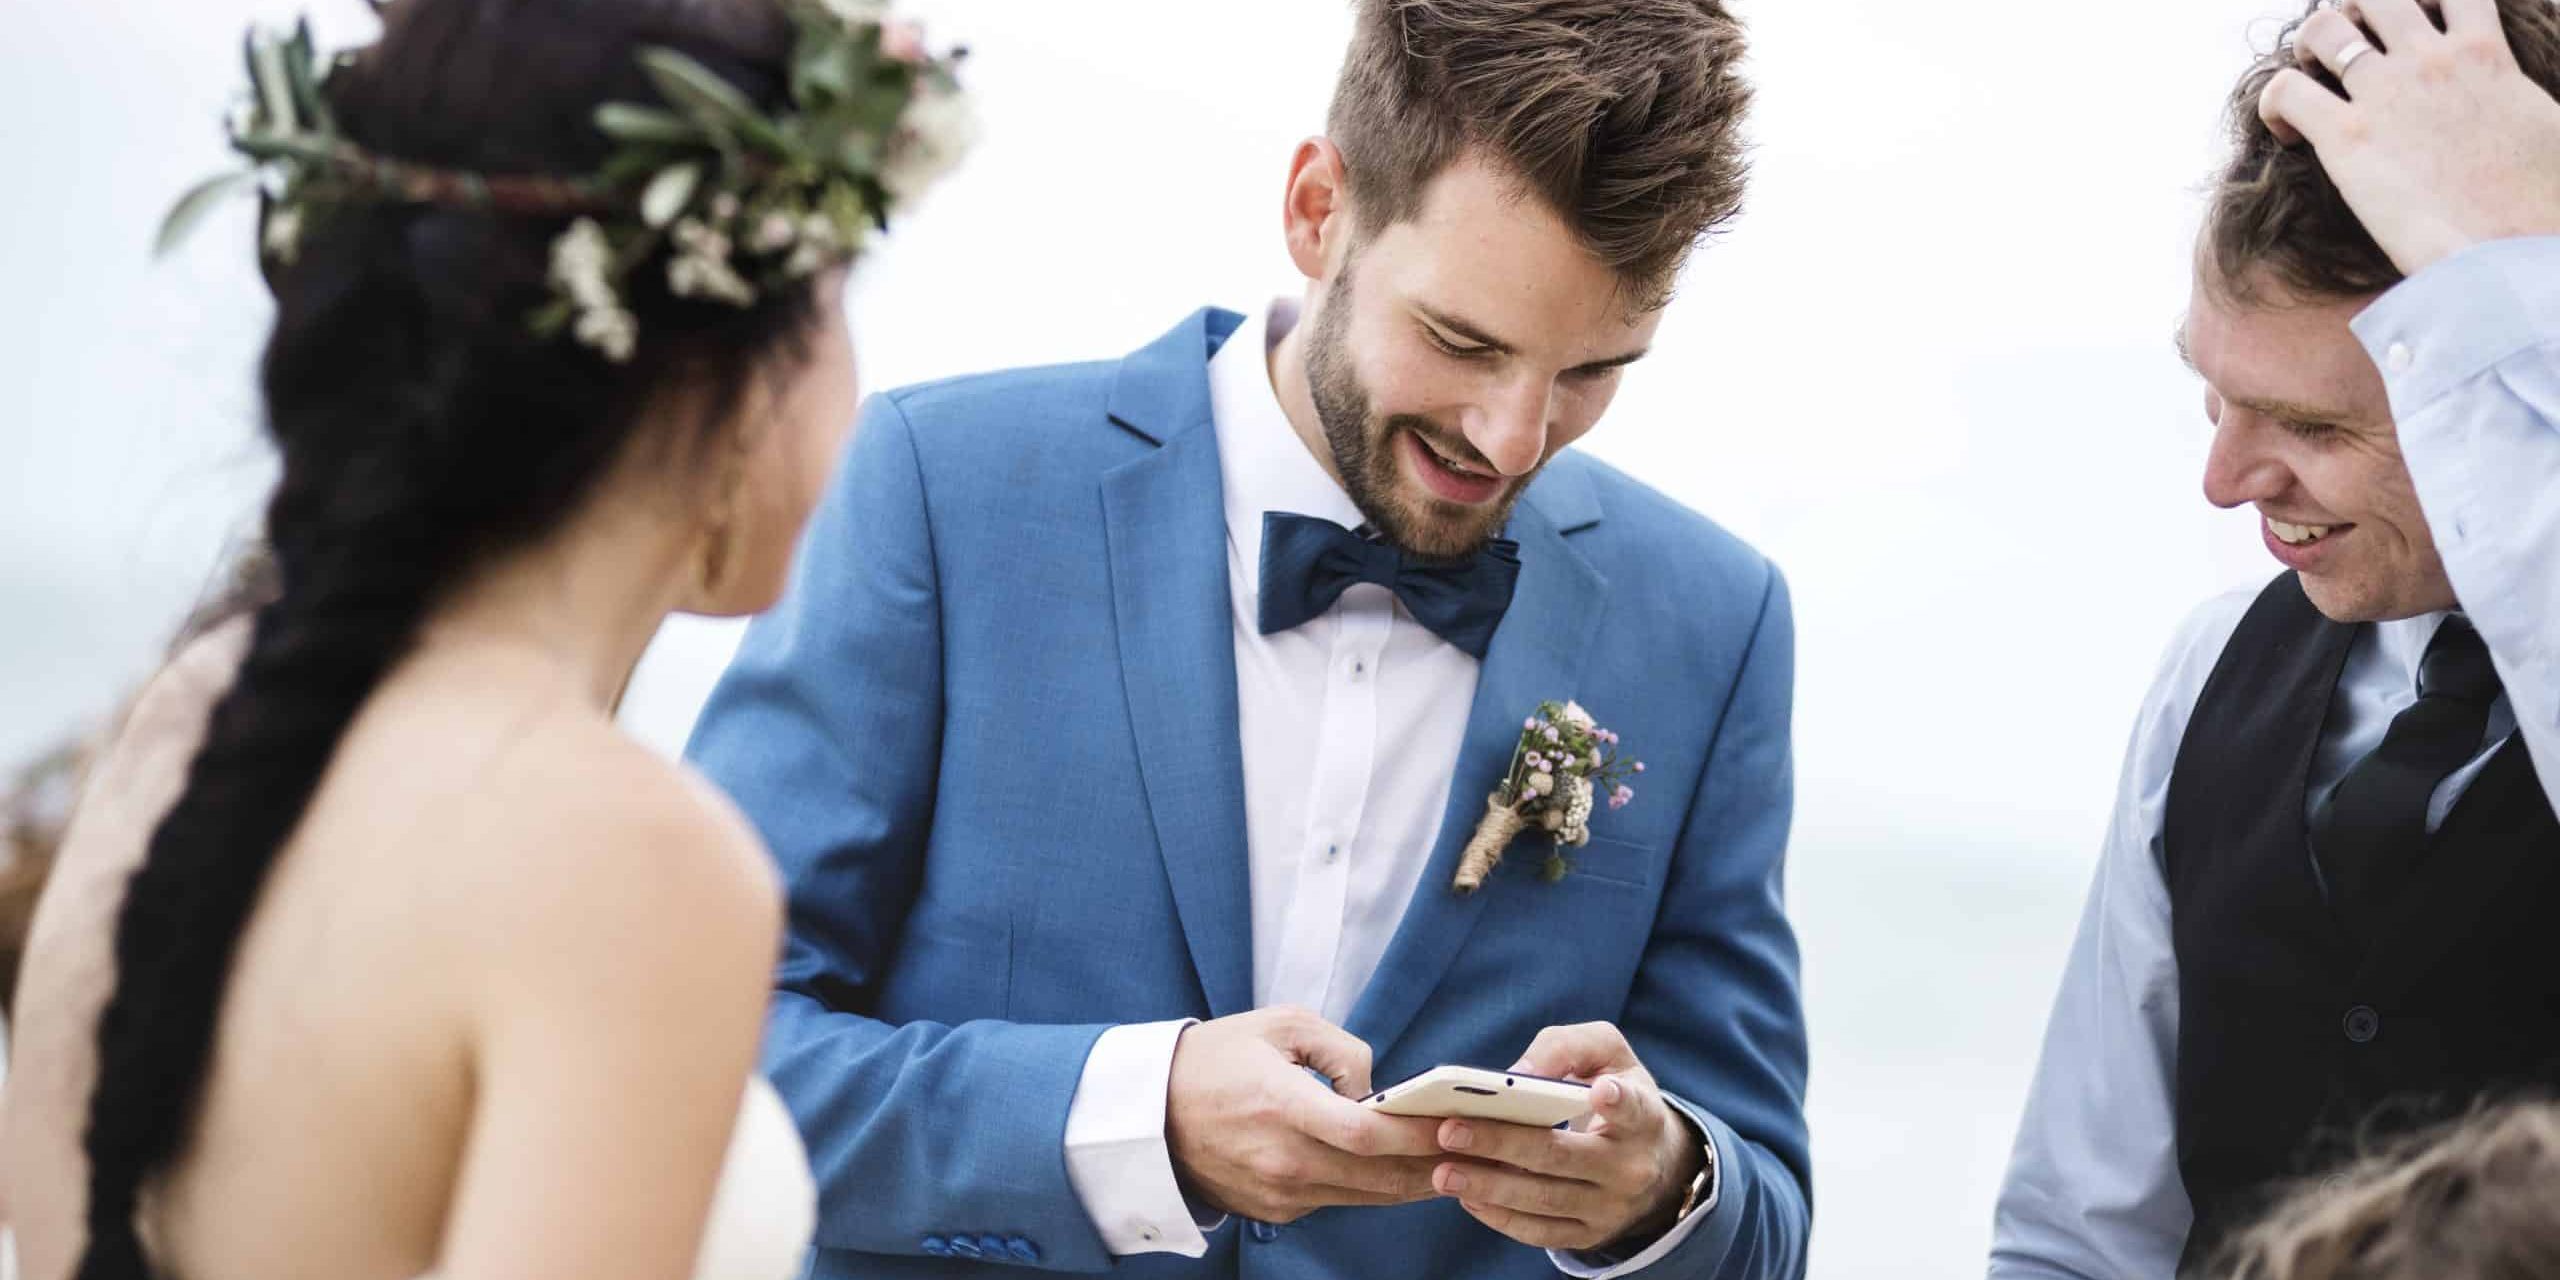 Groom occupied with phone at beach wedding ceremony